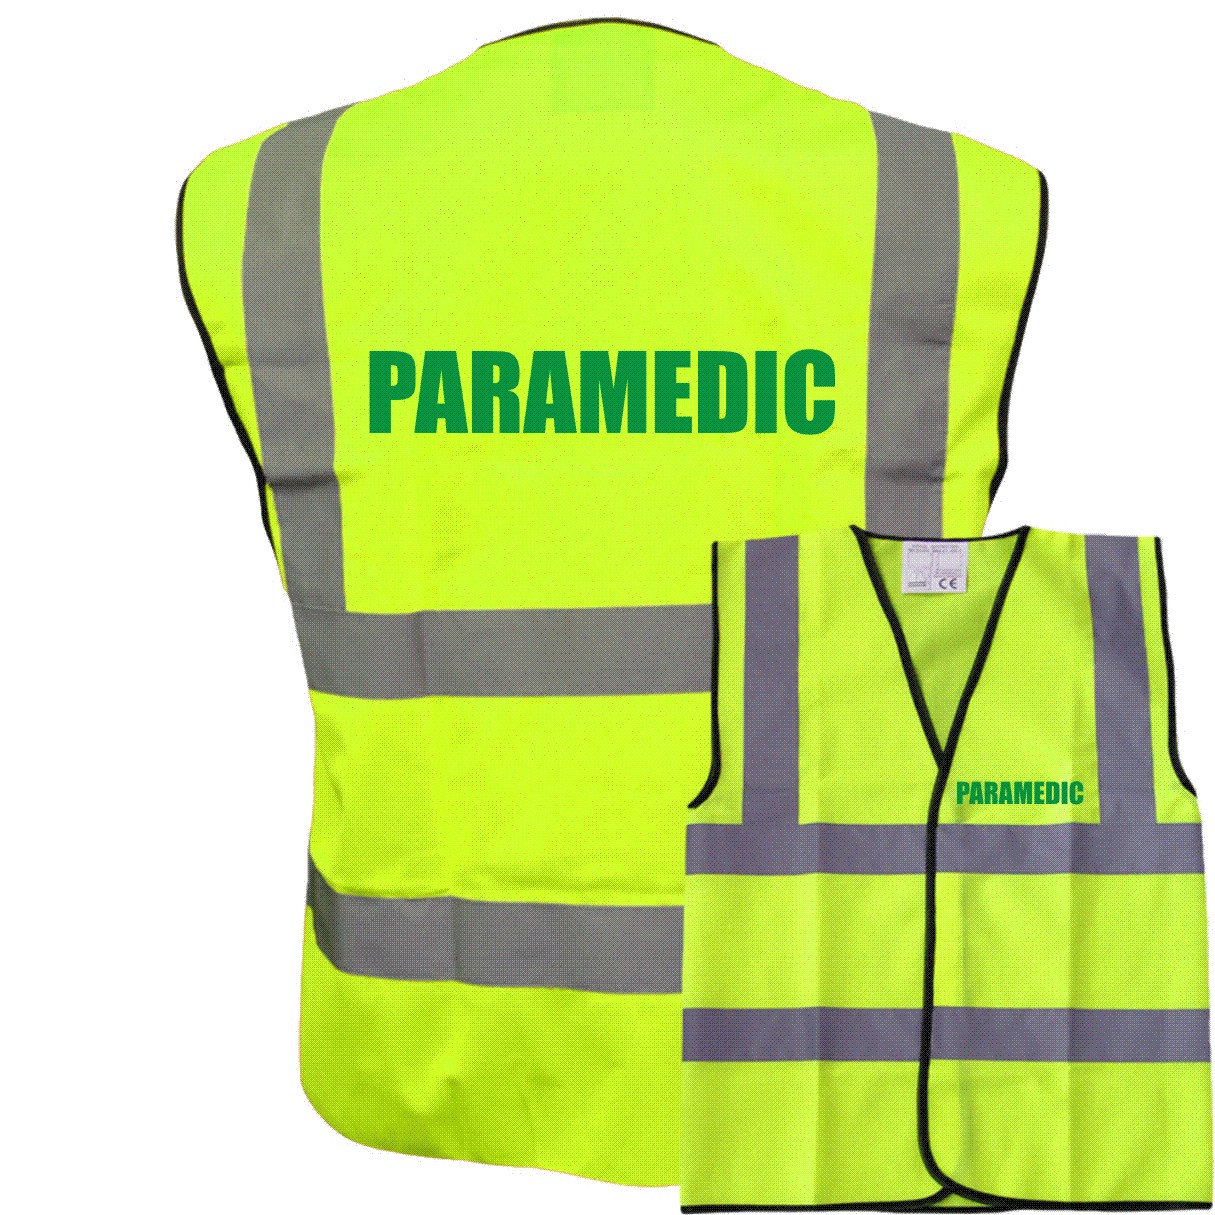 4 Sizes Events Paramedic Green Safety Reflective Hi Visibility Vest Riding 